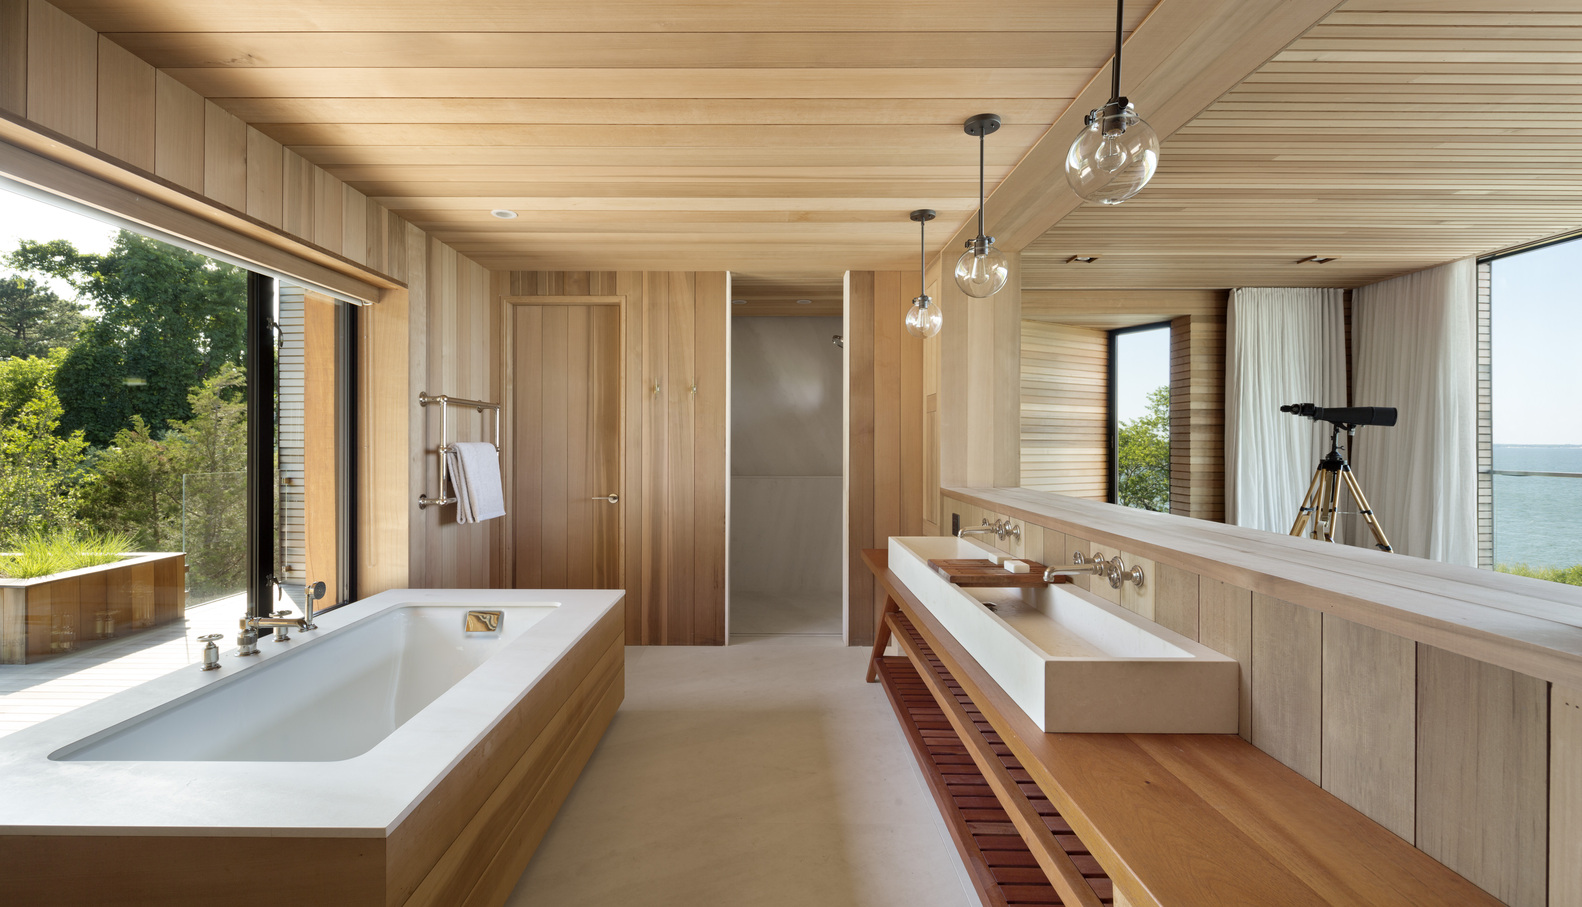 The bathroom in the new Peconic House.